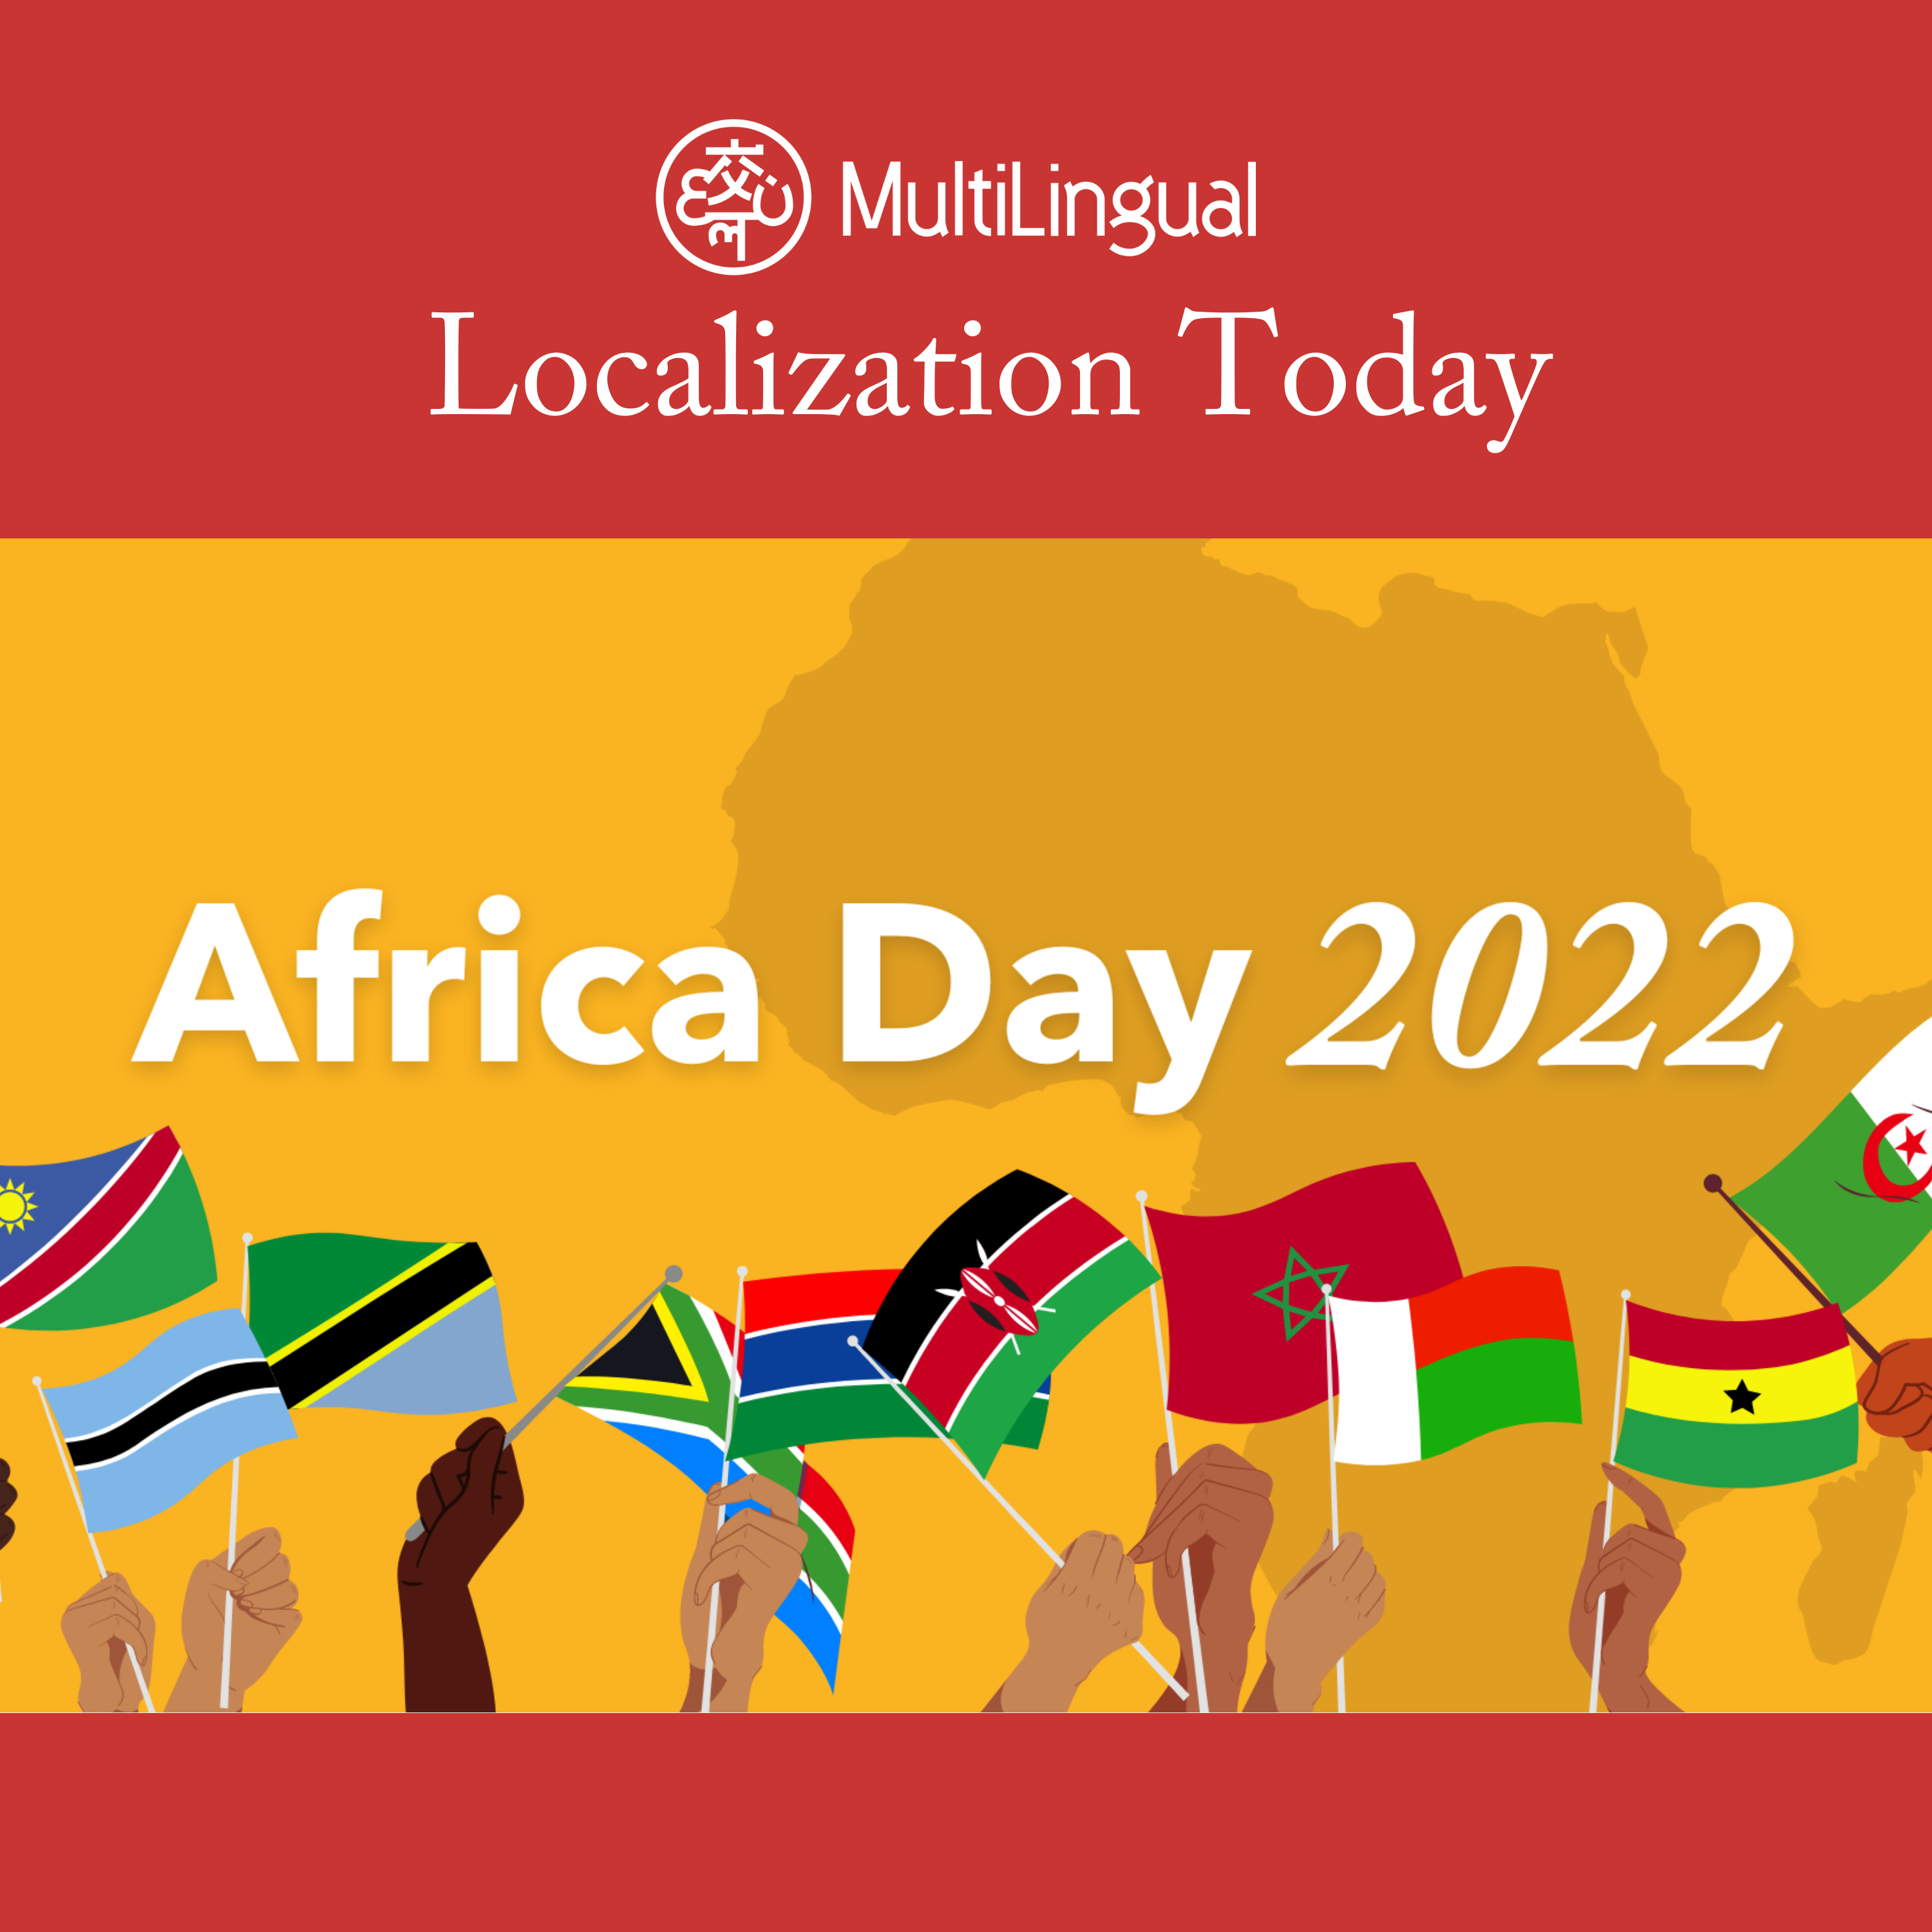 Africa Day 2022: Developing a more equitable tech landscape for African languages